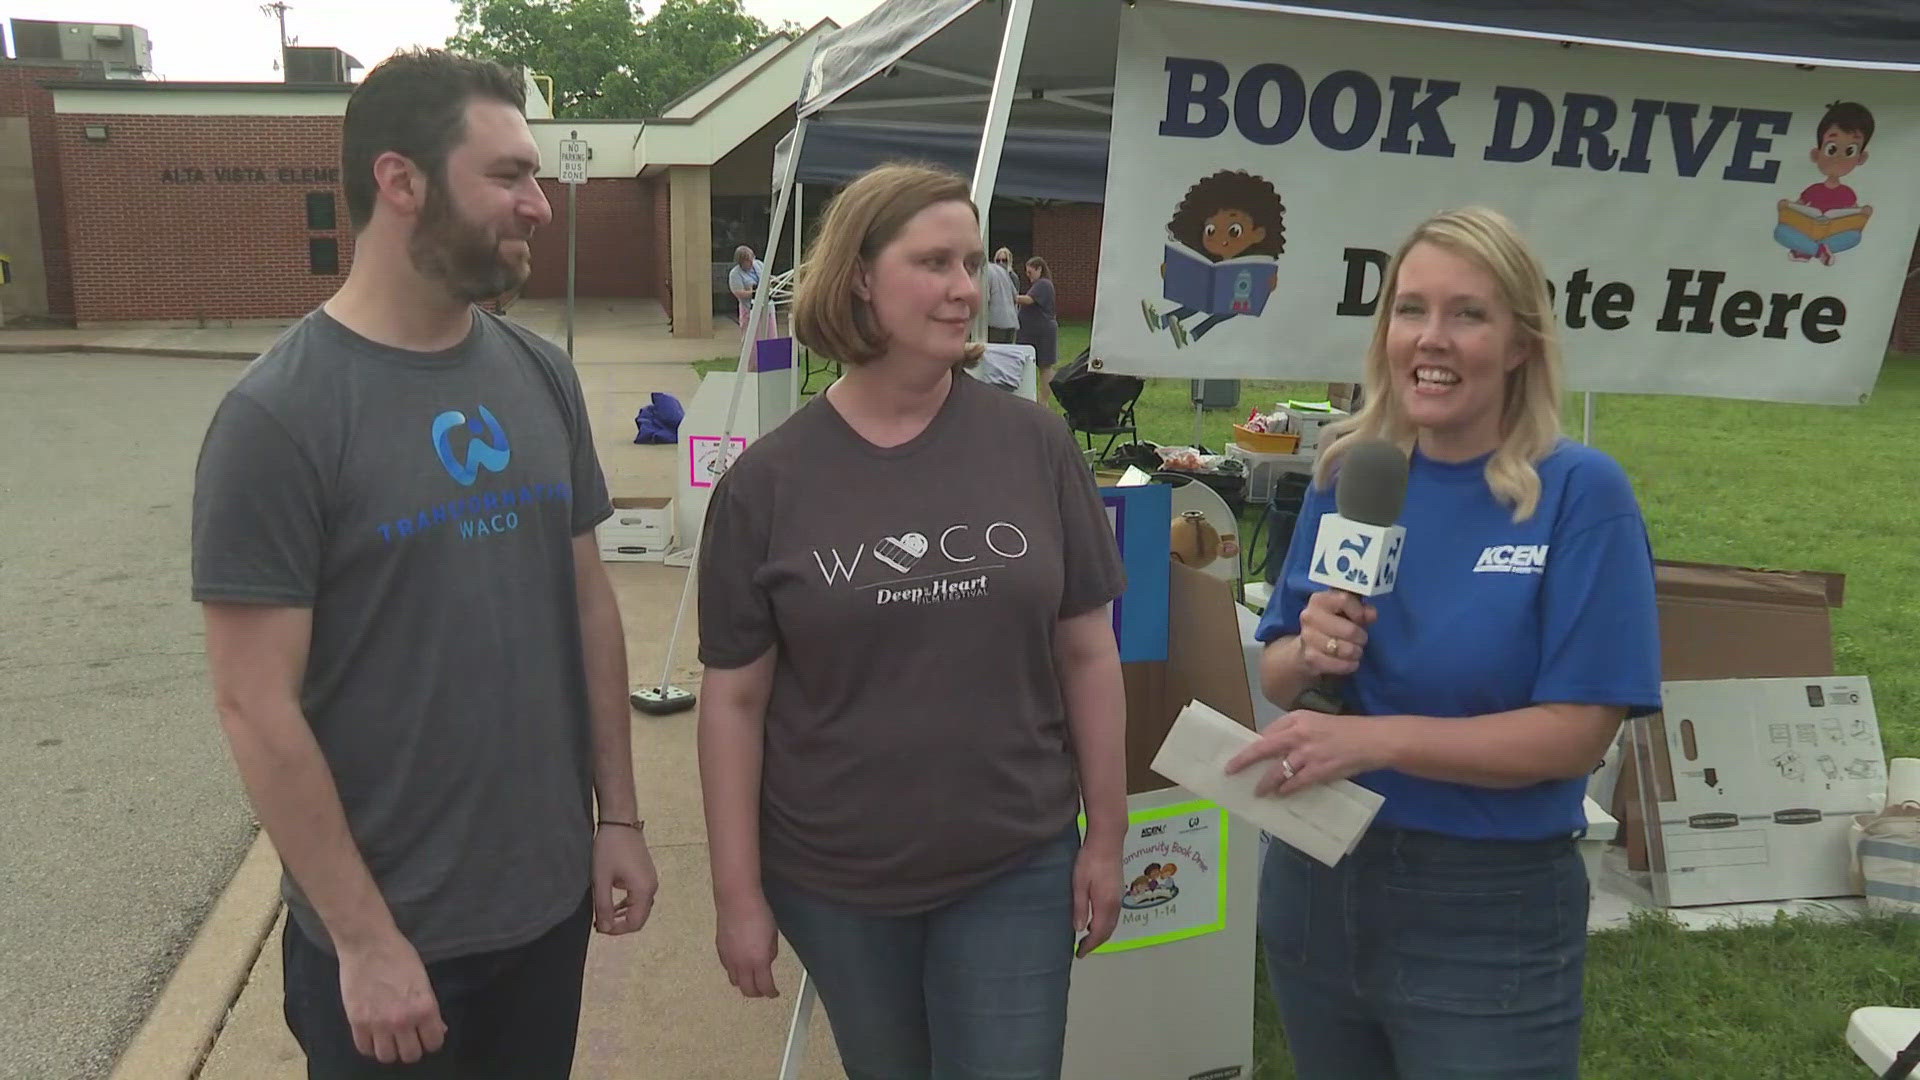 Central Texans donated books by the boxload at Alta Vista Elementary on May 6 to help children in the community.